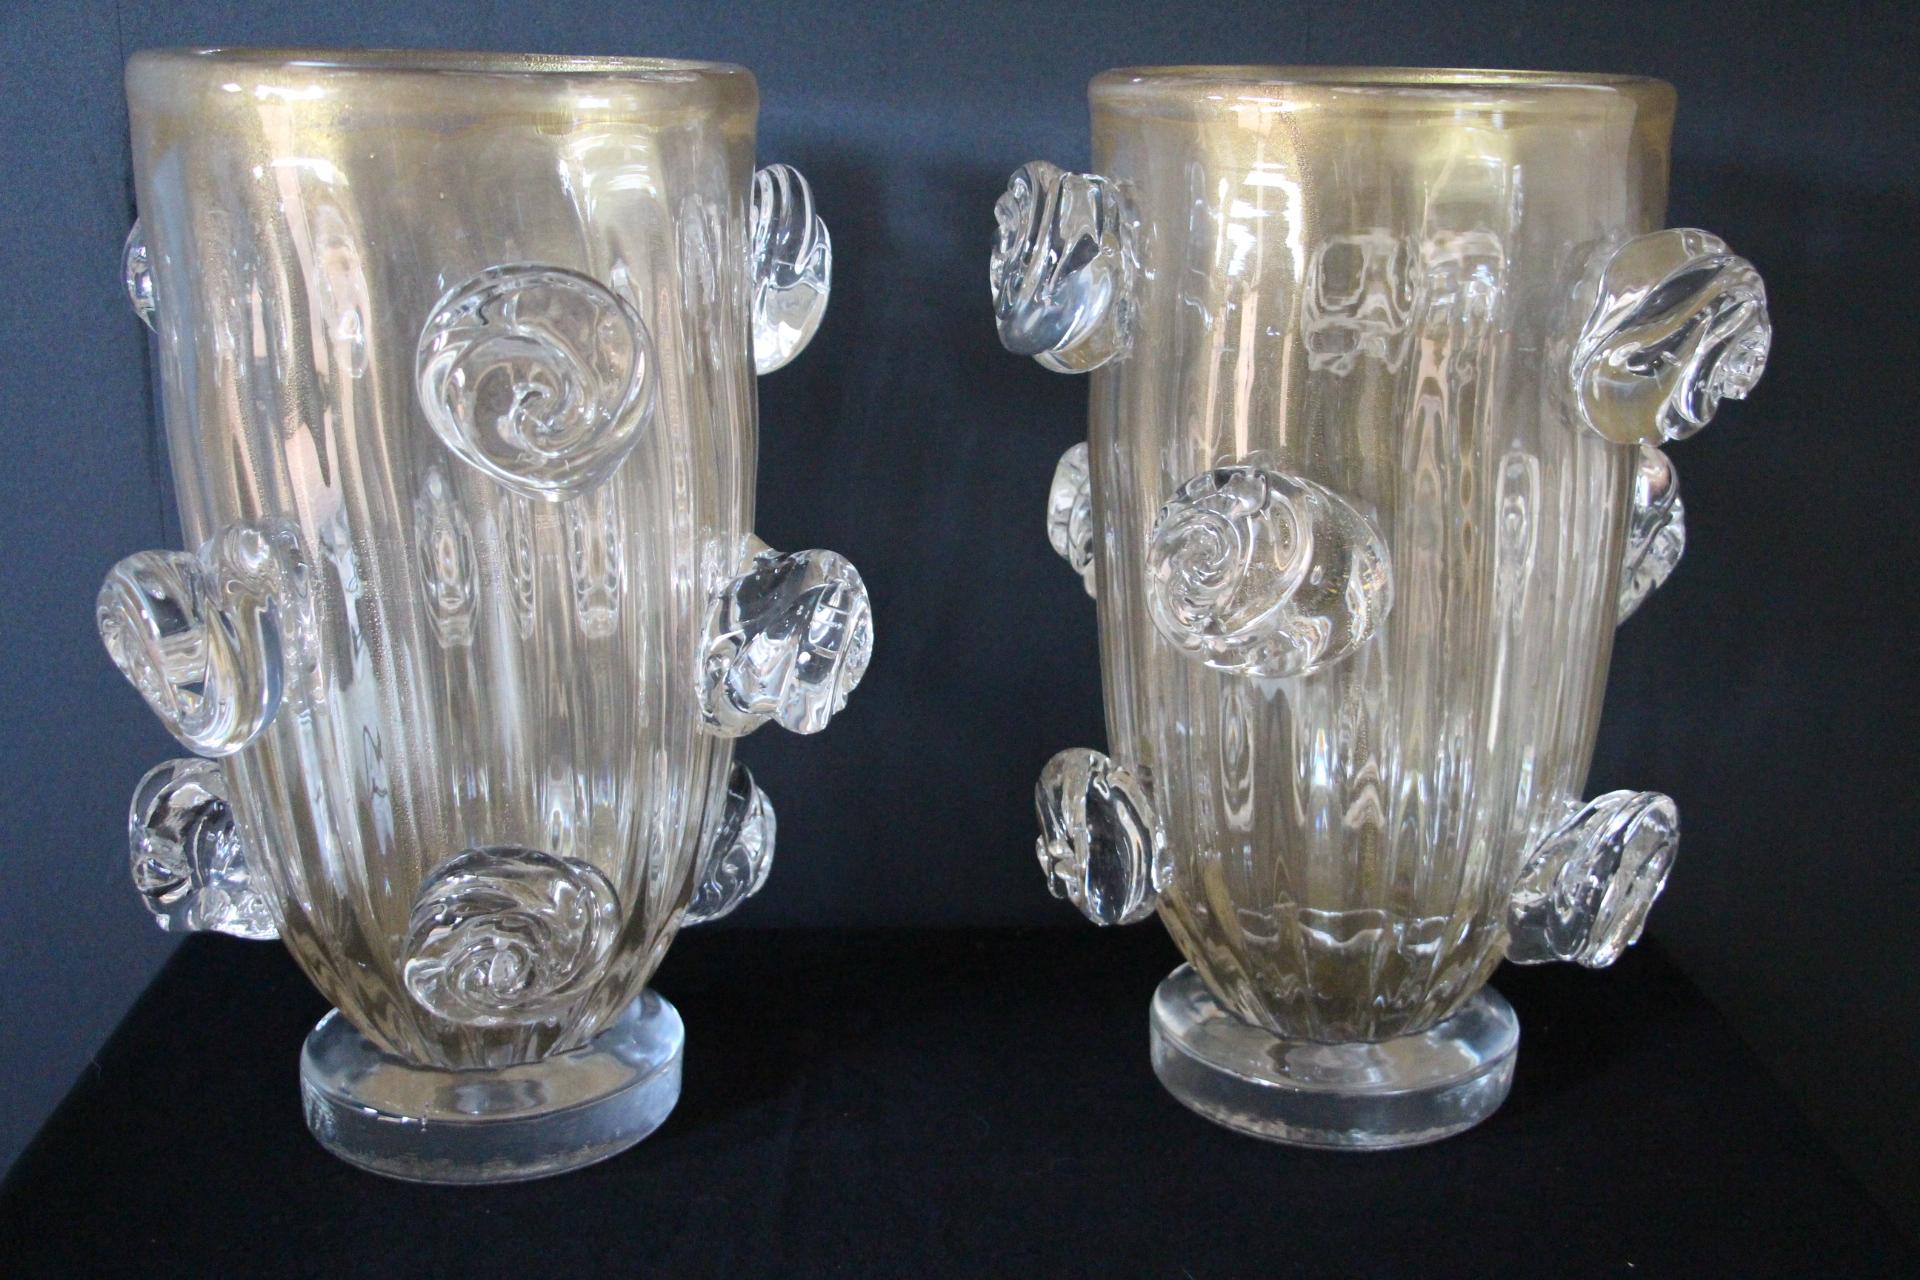 Pair of Large Golden Murano Glass Vases With Roses Decor by Costantini 11